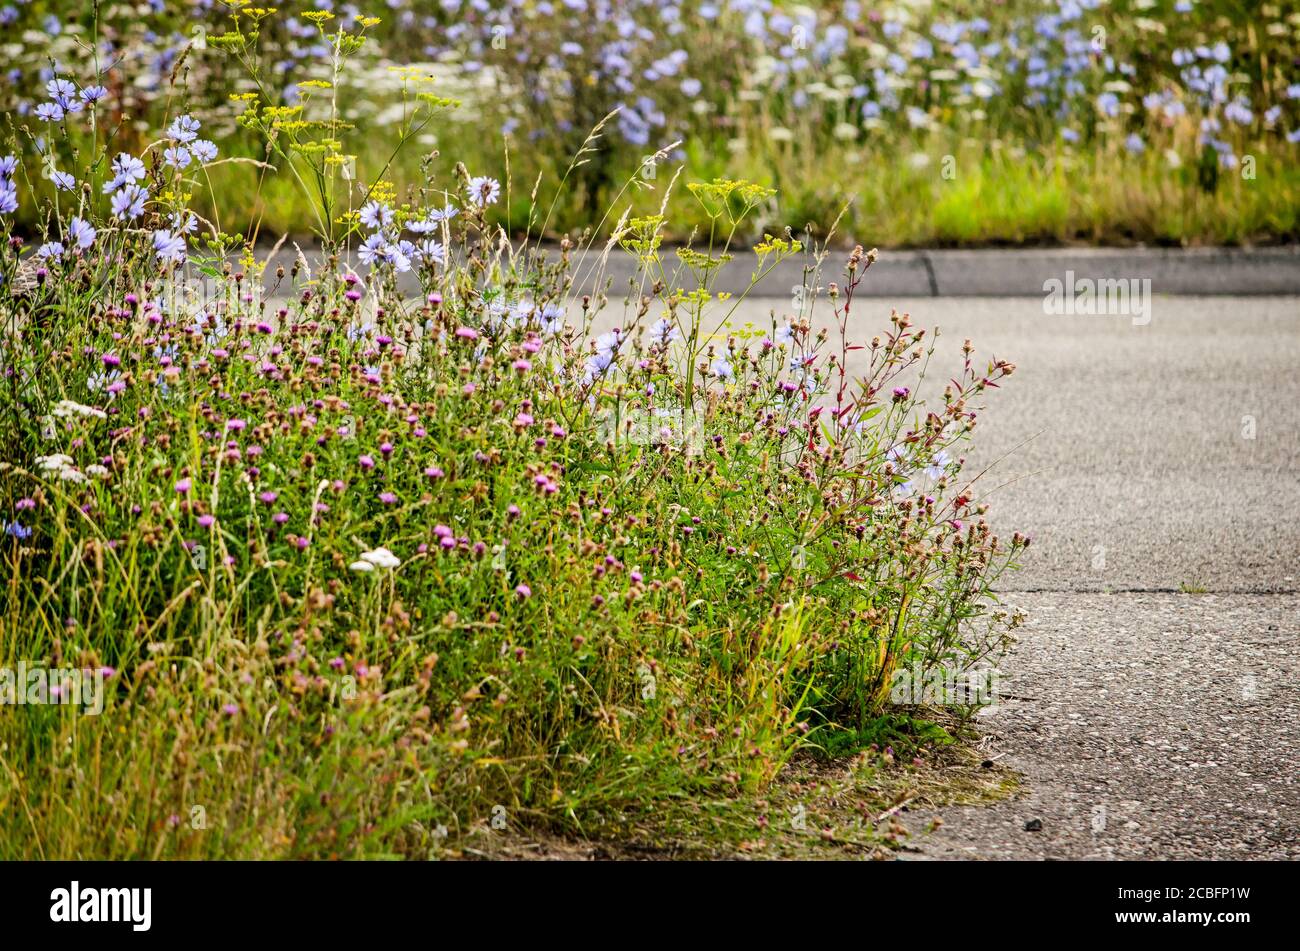 Asphalt road with with an abundance of chicory, thistle and other wildflowers in summer in the town of Zwolle, The Netherlands Stock Photo